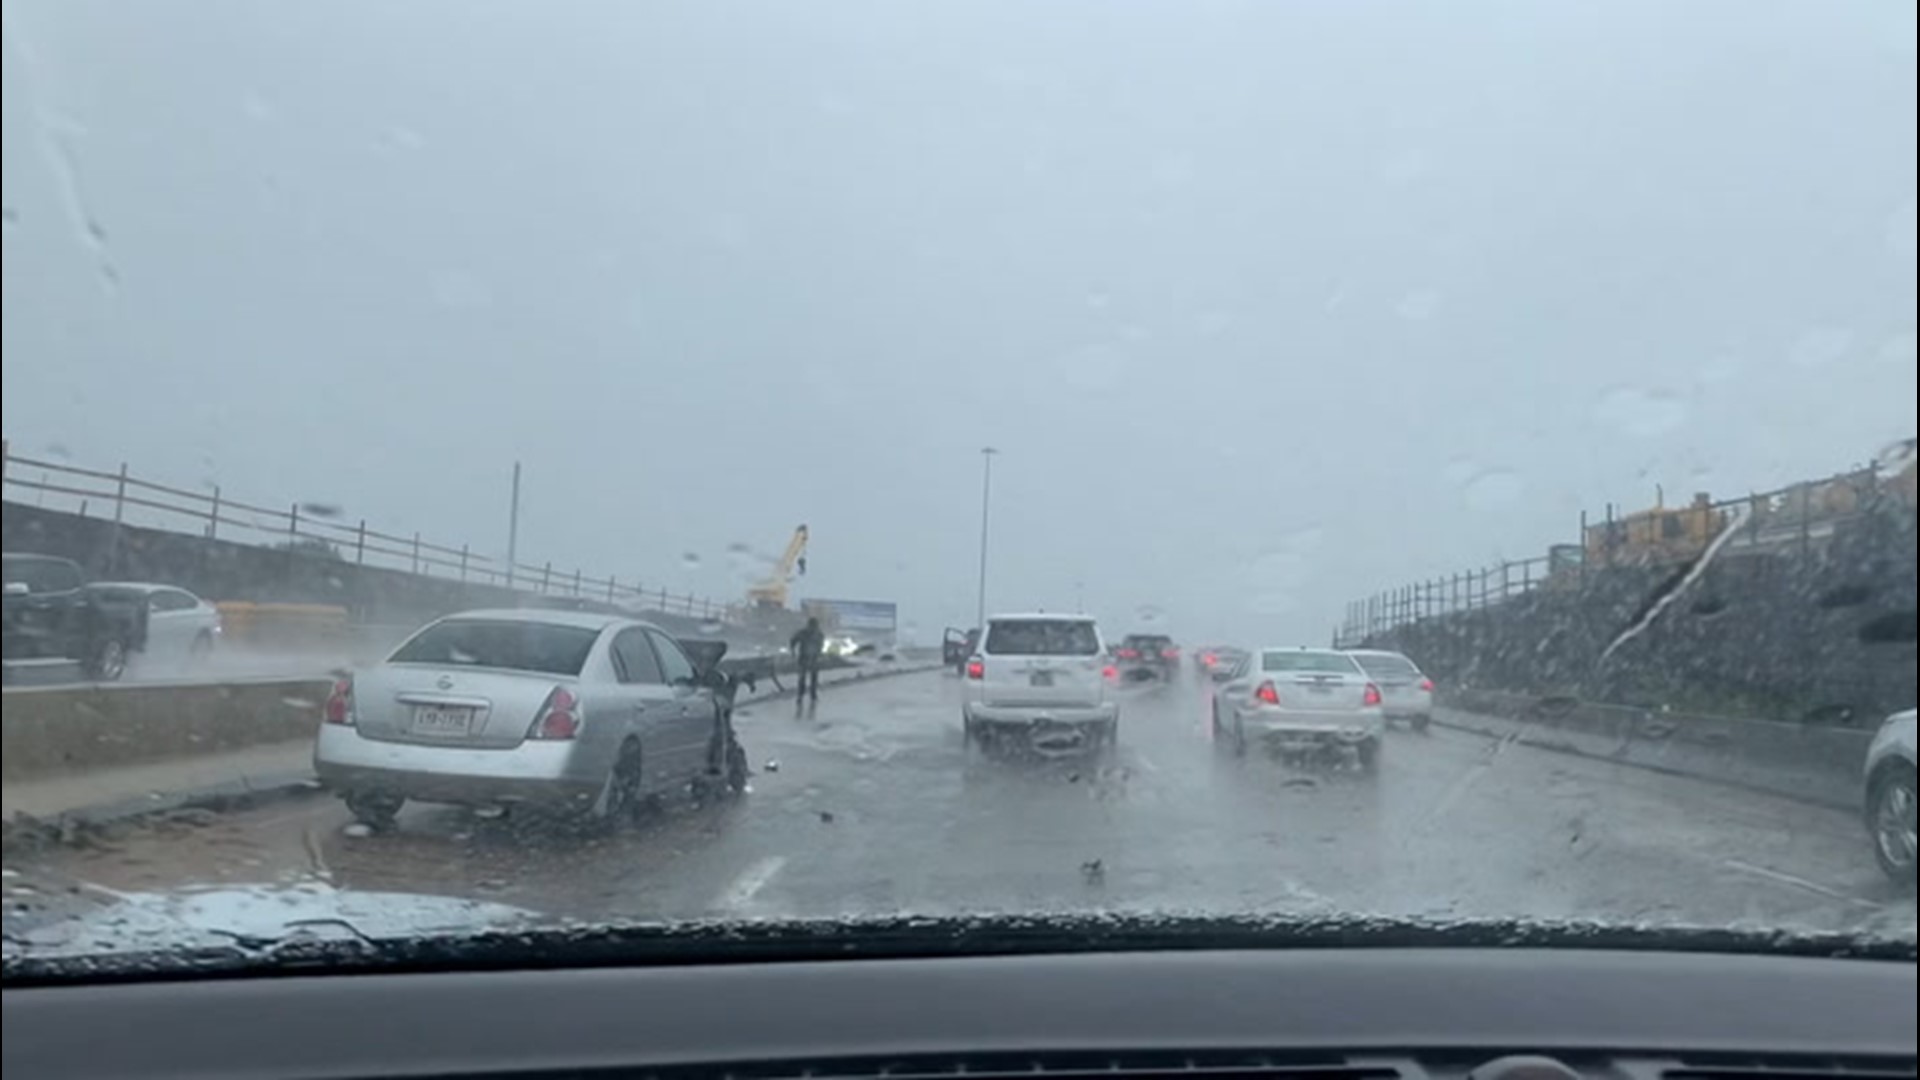 Memorial Day is a washout in Dallas. Drivers hydroplaned on wet highways, and urban flooding was reported across the DFW Metroplex on May 25.